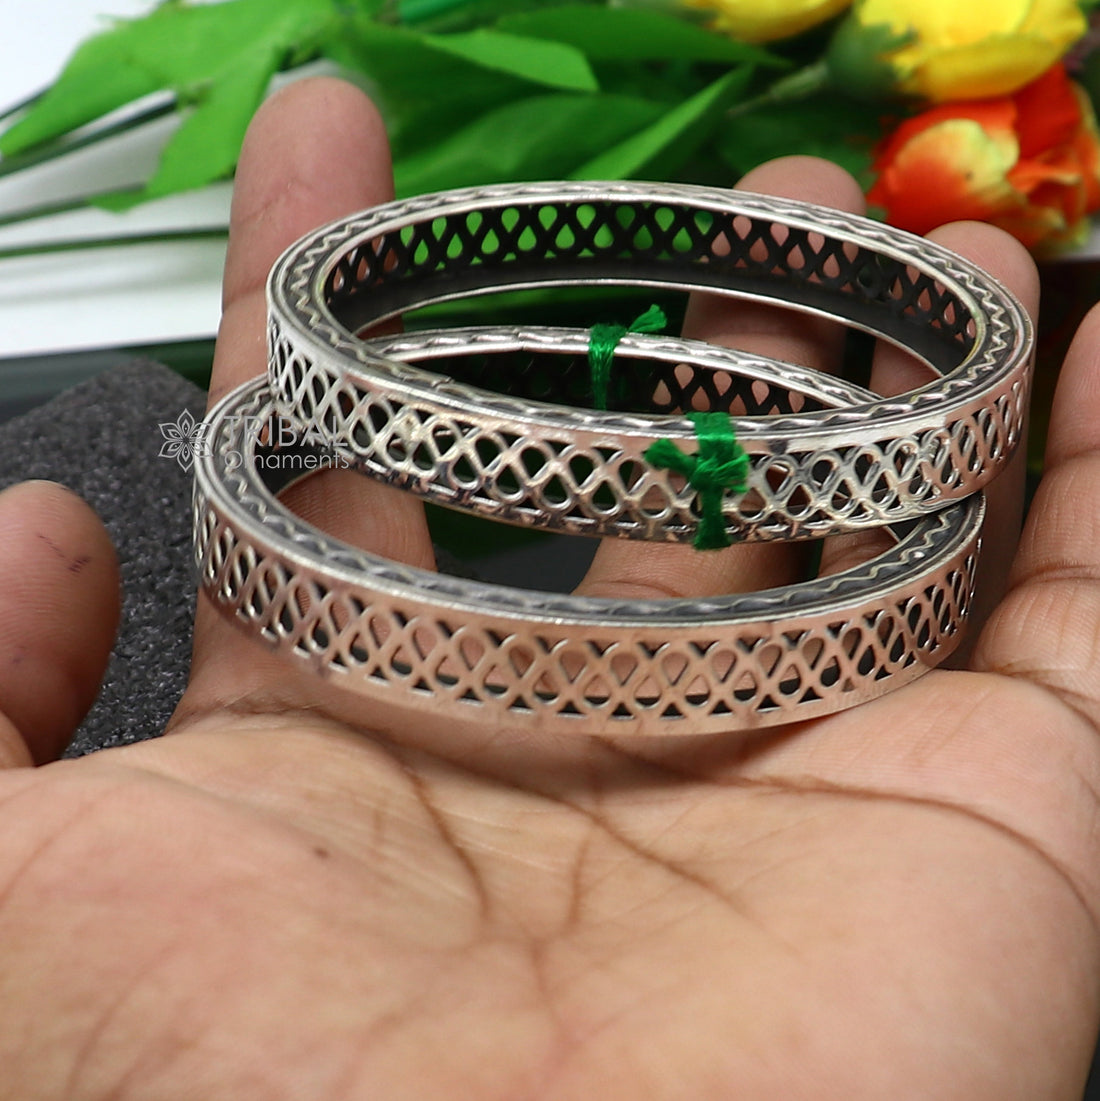 Exclusive functional 925 sterling silver unique style handmade bangle bracelet , best brides collection wedding NAVRATRI jewelry nba402 - TRIBAL ORNAMENTS